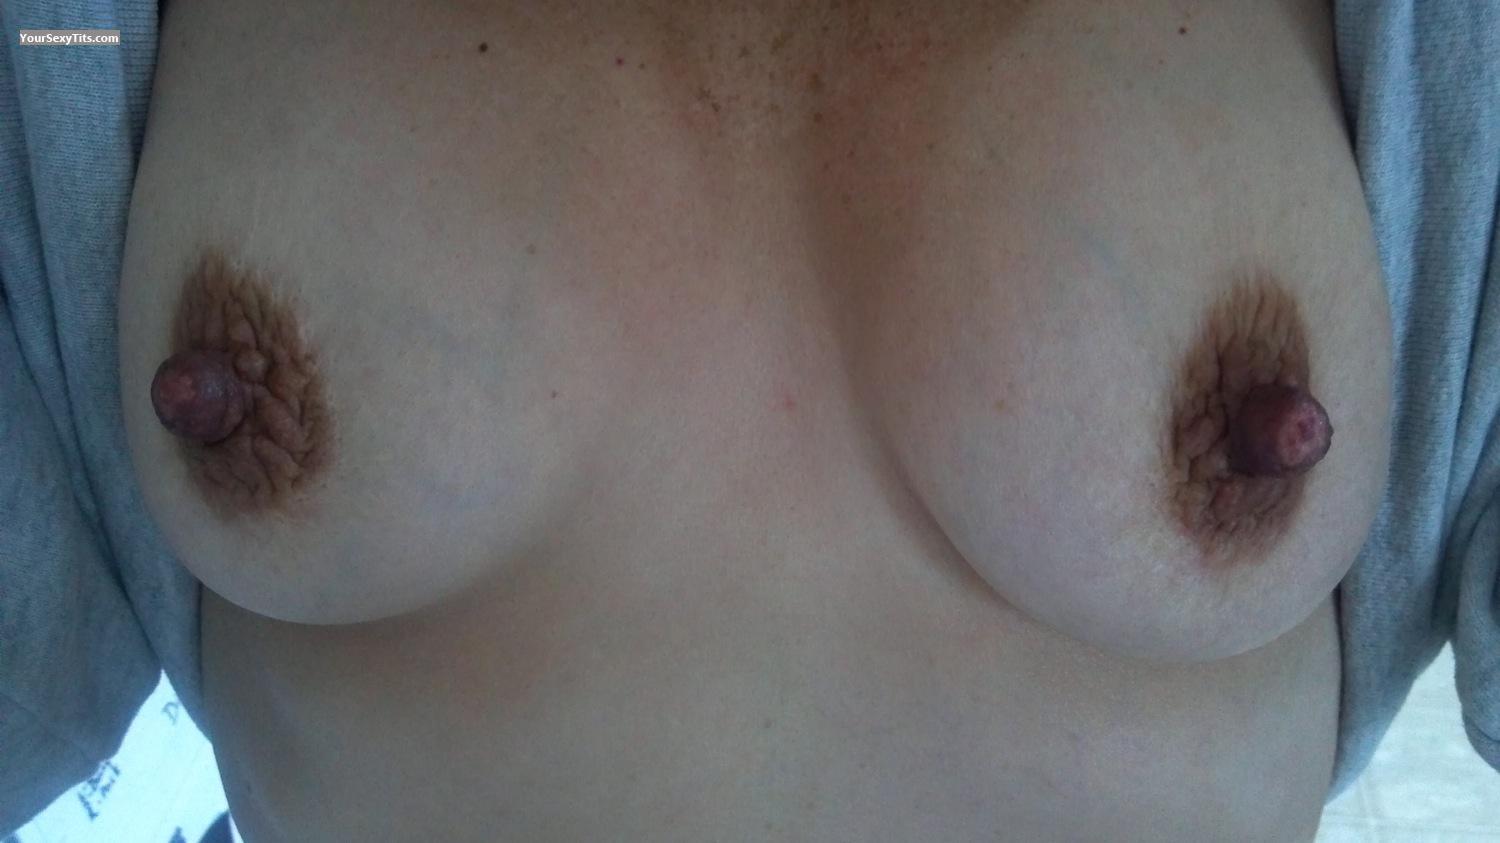 Tit Flash: My Small Tits (Selfie) - GreatNips69 from United States